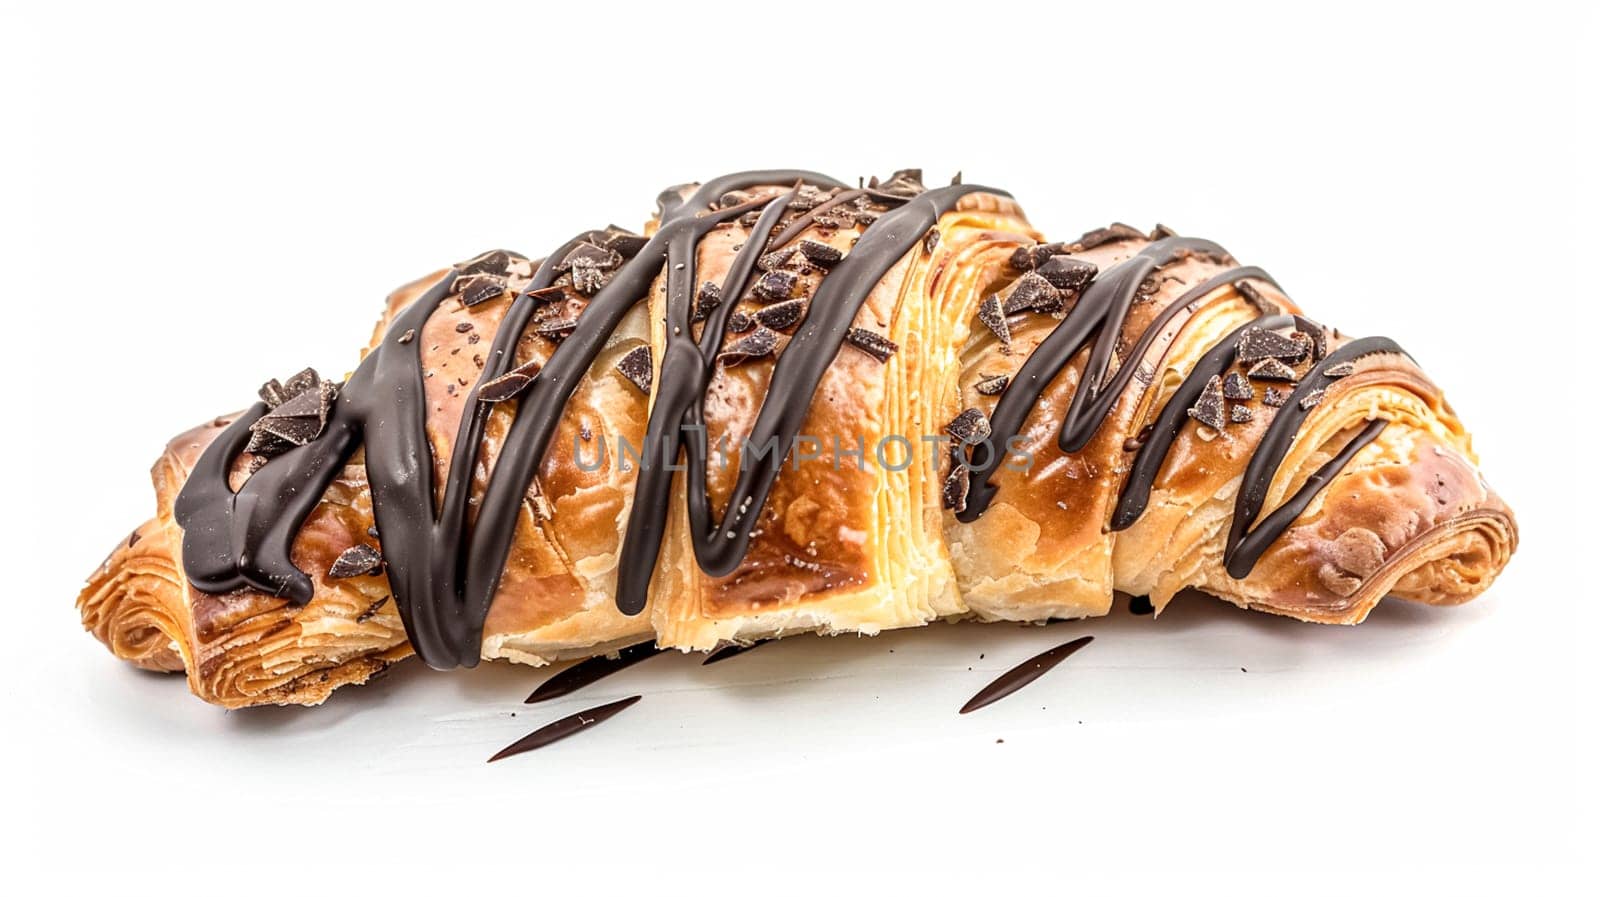 Chocolate croissant with cocoa, sweet pastry for breakfast by Anneleven